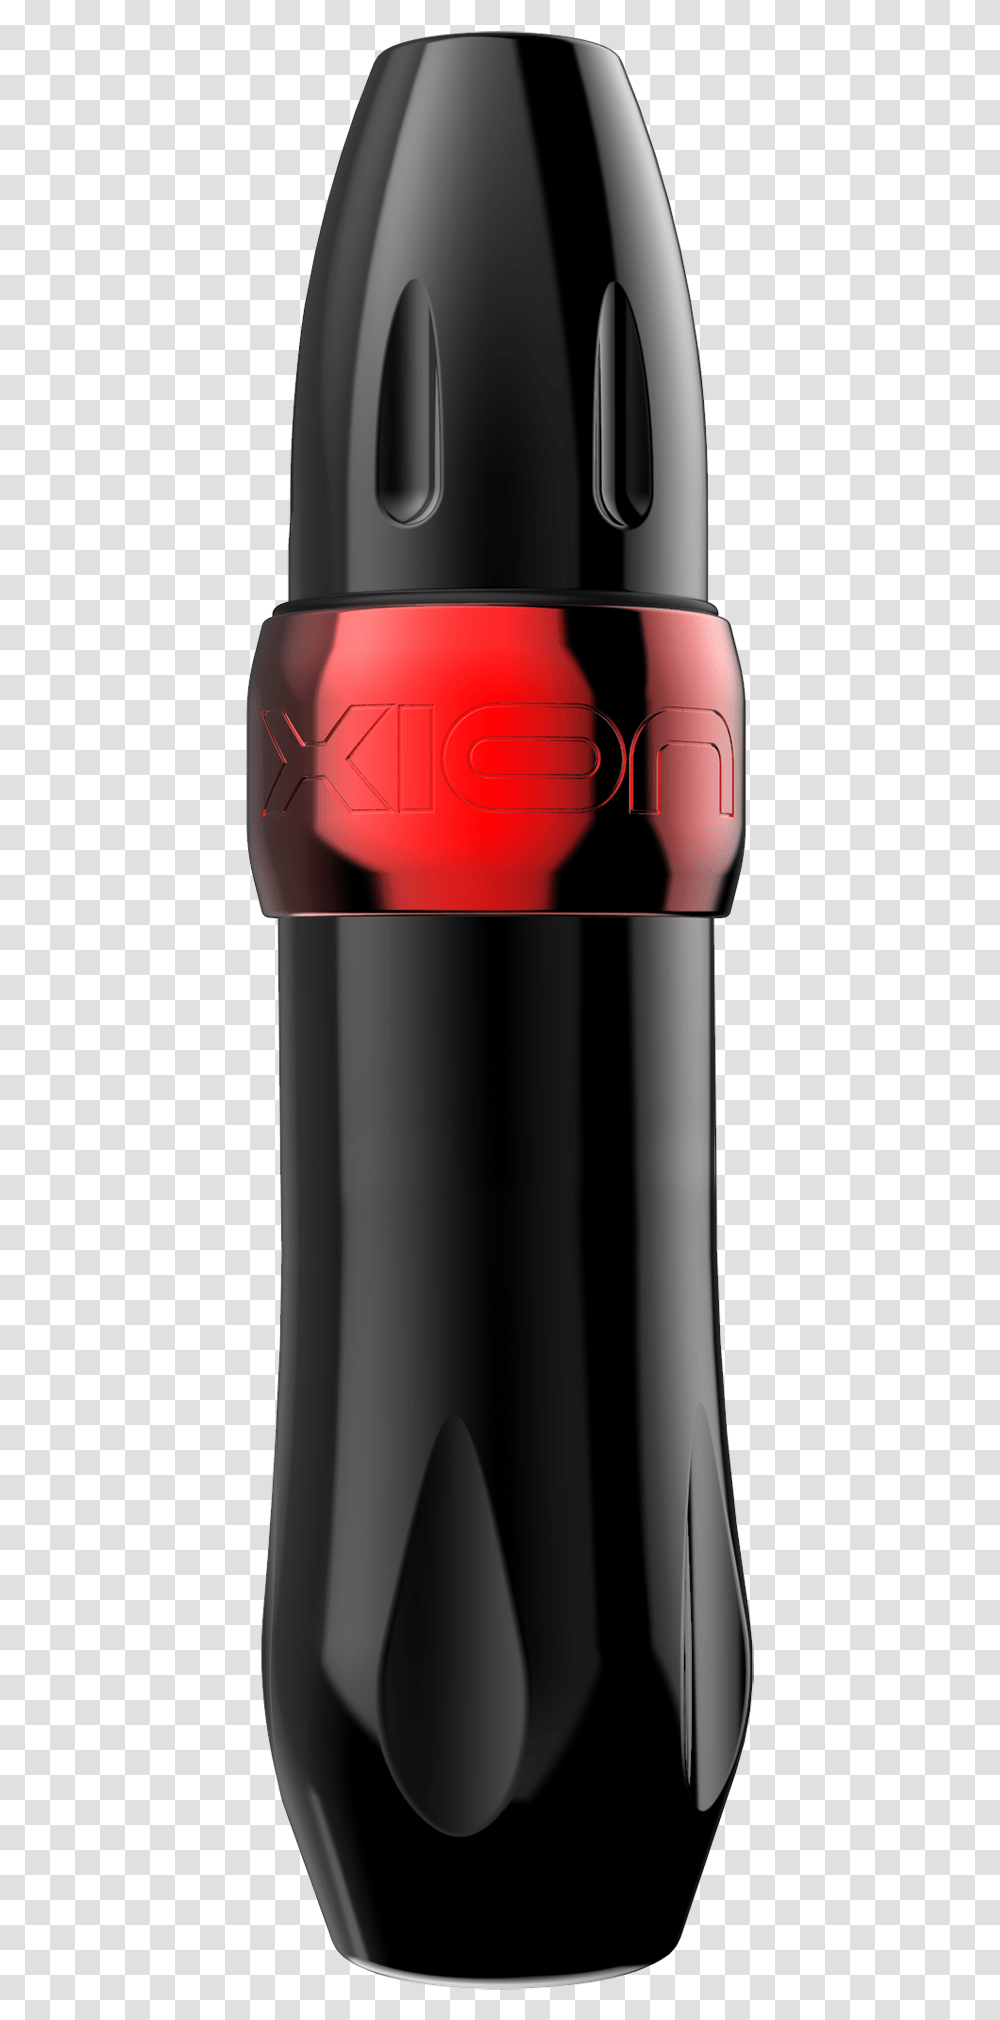 Xion Ruby Body 1 2000x Fk Pen Tattoo Machine, Red Wine, Alcohol, Beverage, Drink Transparent Png